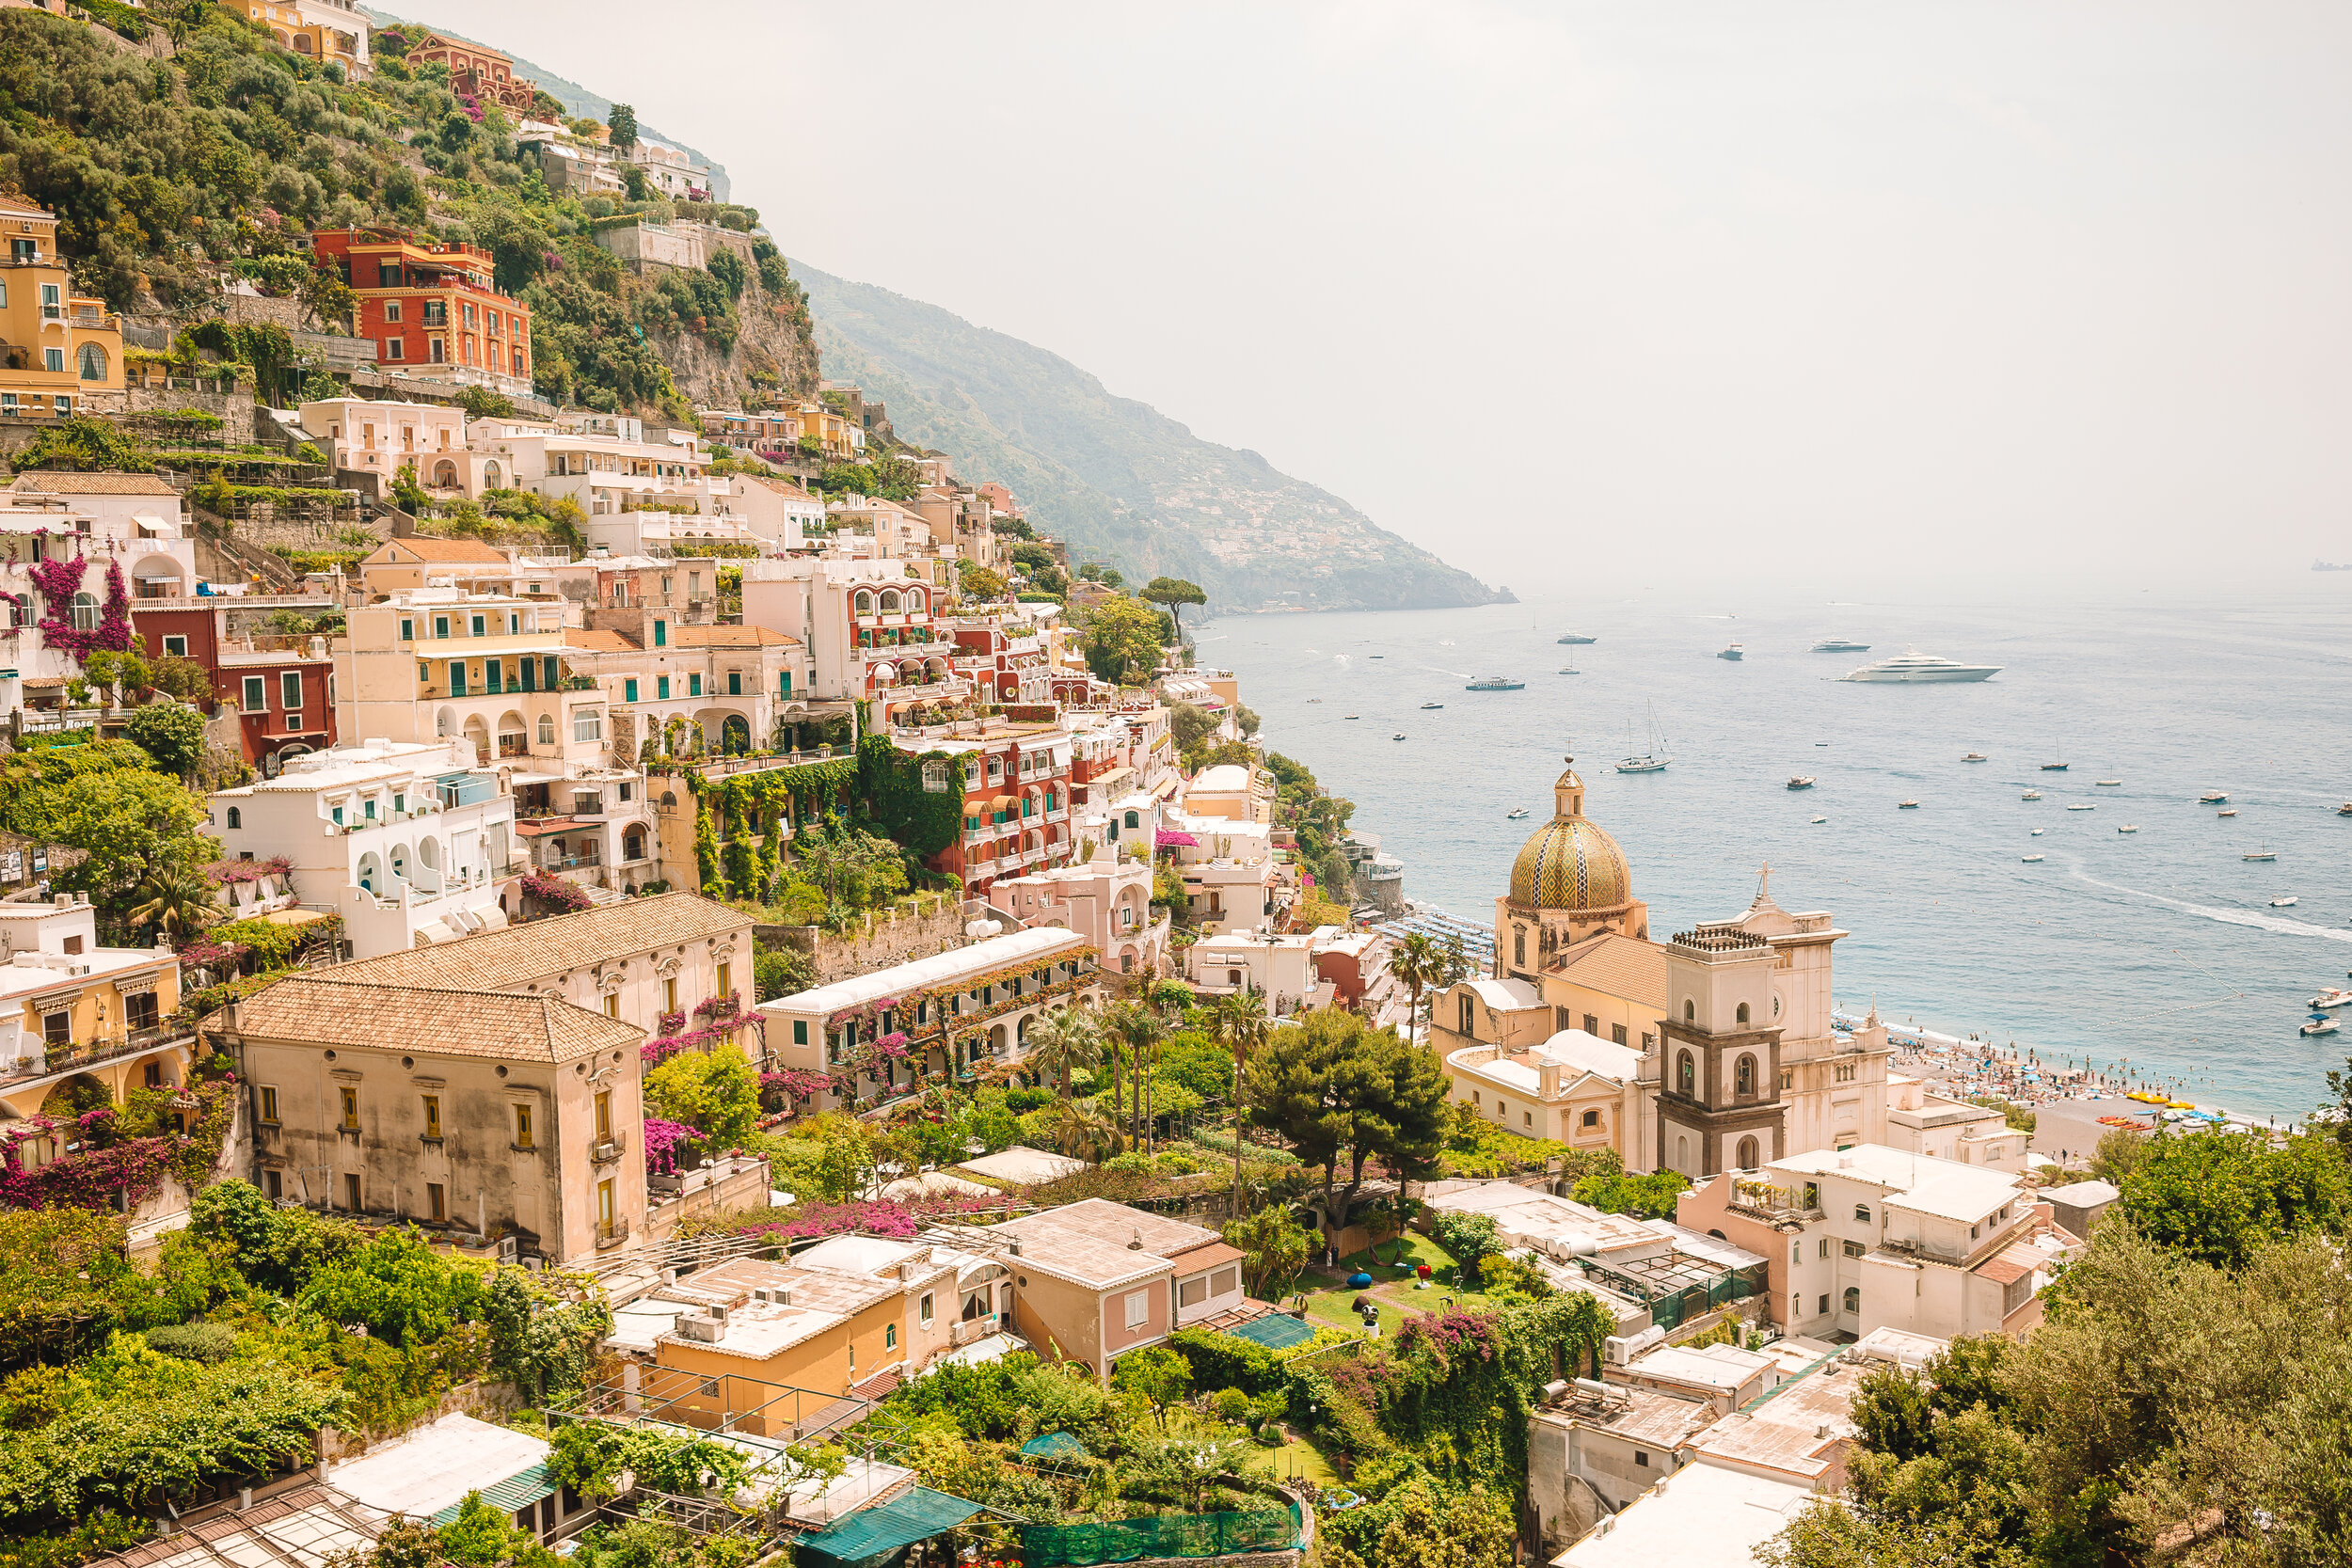 view-of-the-town-of-positano-with-flowers-L65MCB3.jpg